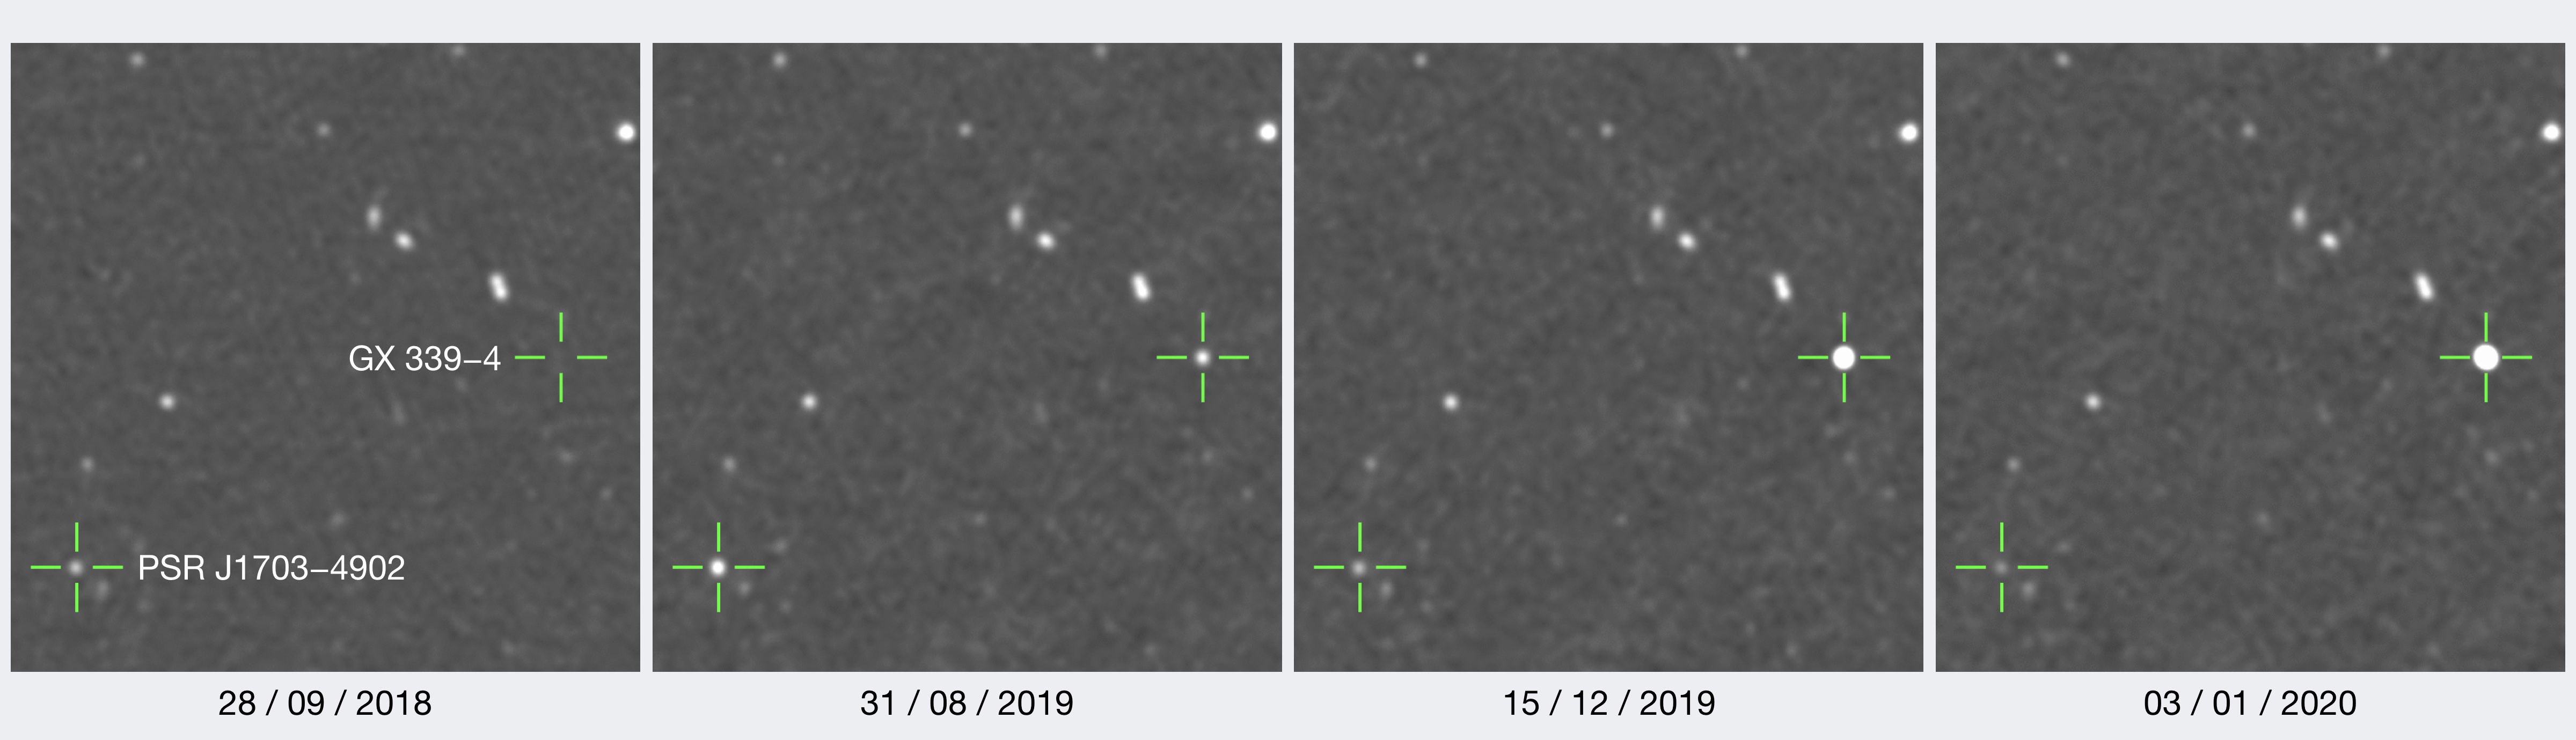 Five epochs from the regular monitoring of the Galactic X-ray binary GX339-4